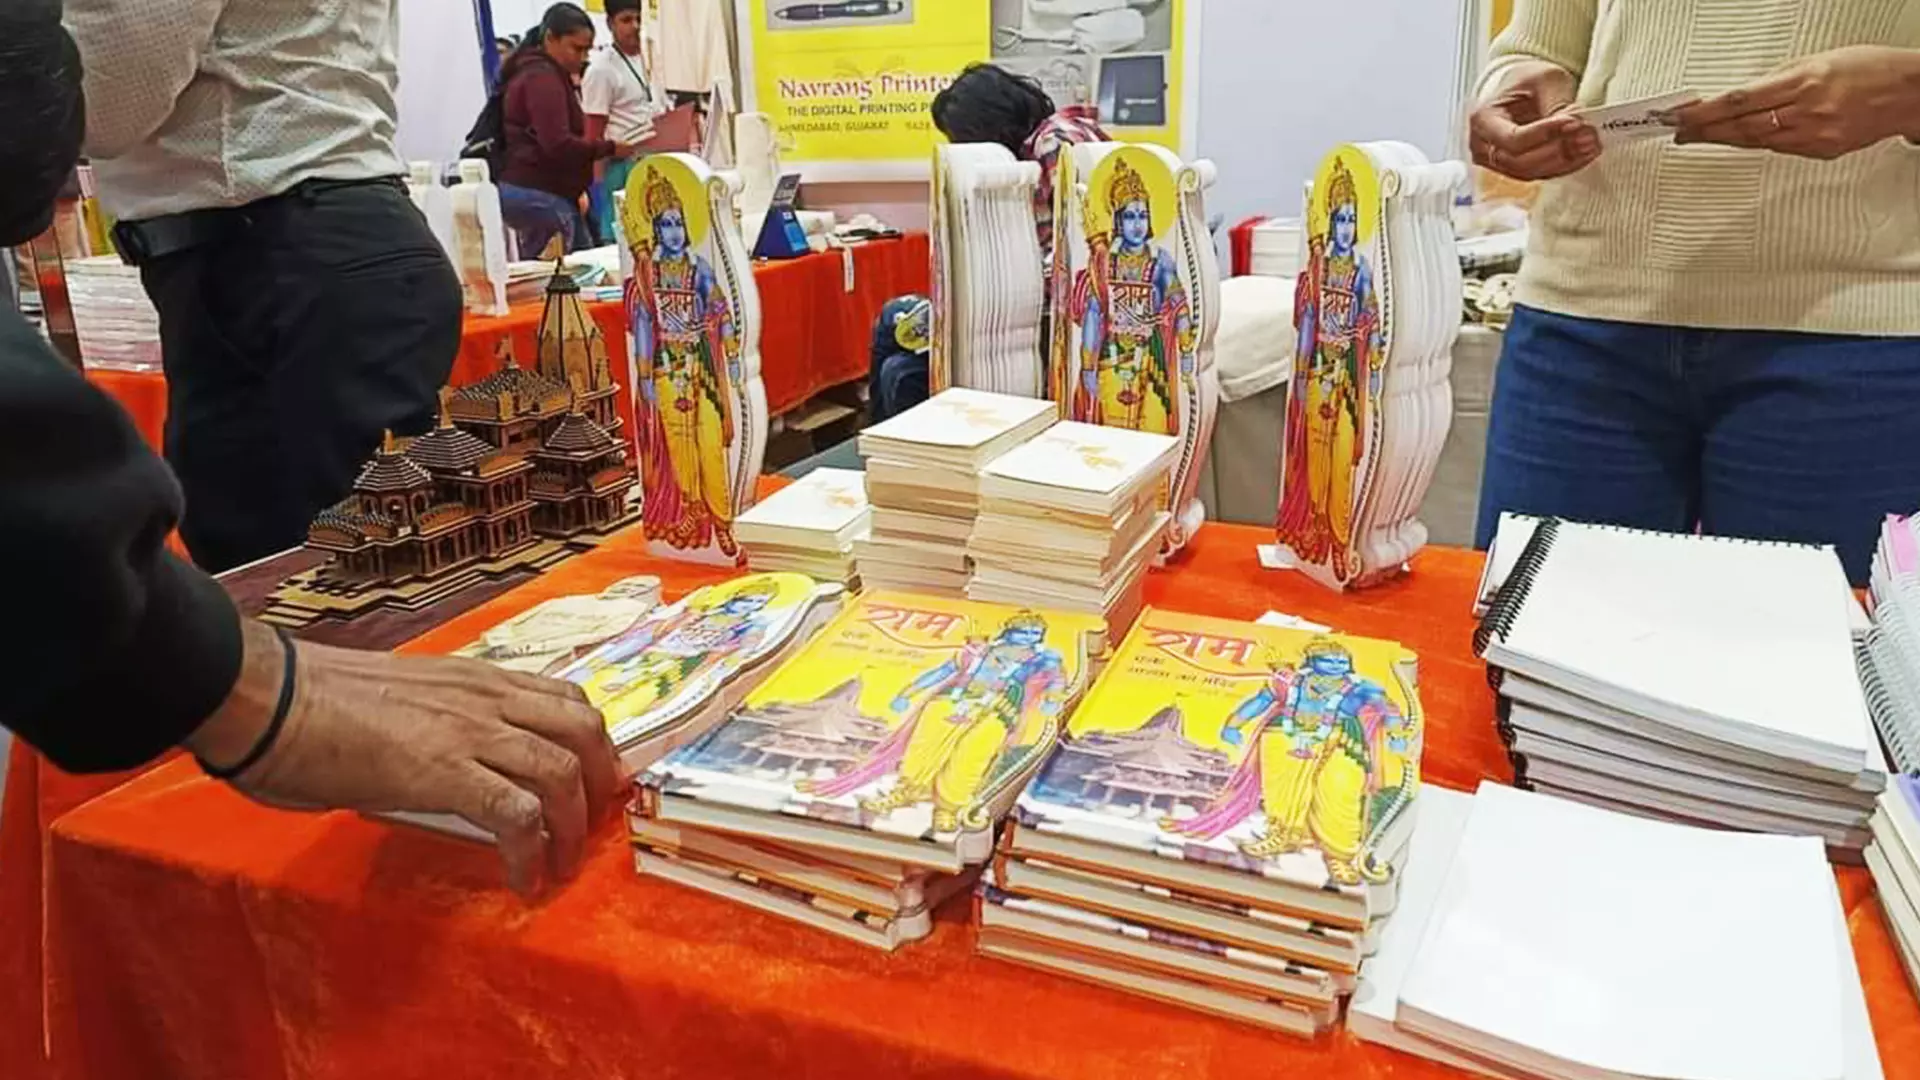 Religious book stalls that dominated the book fair this year.